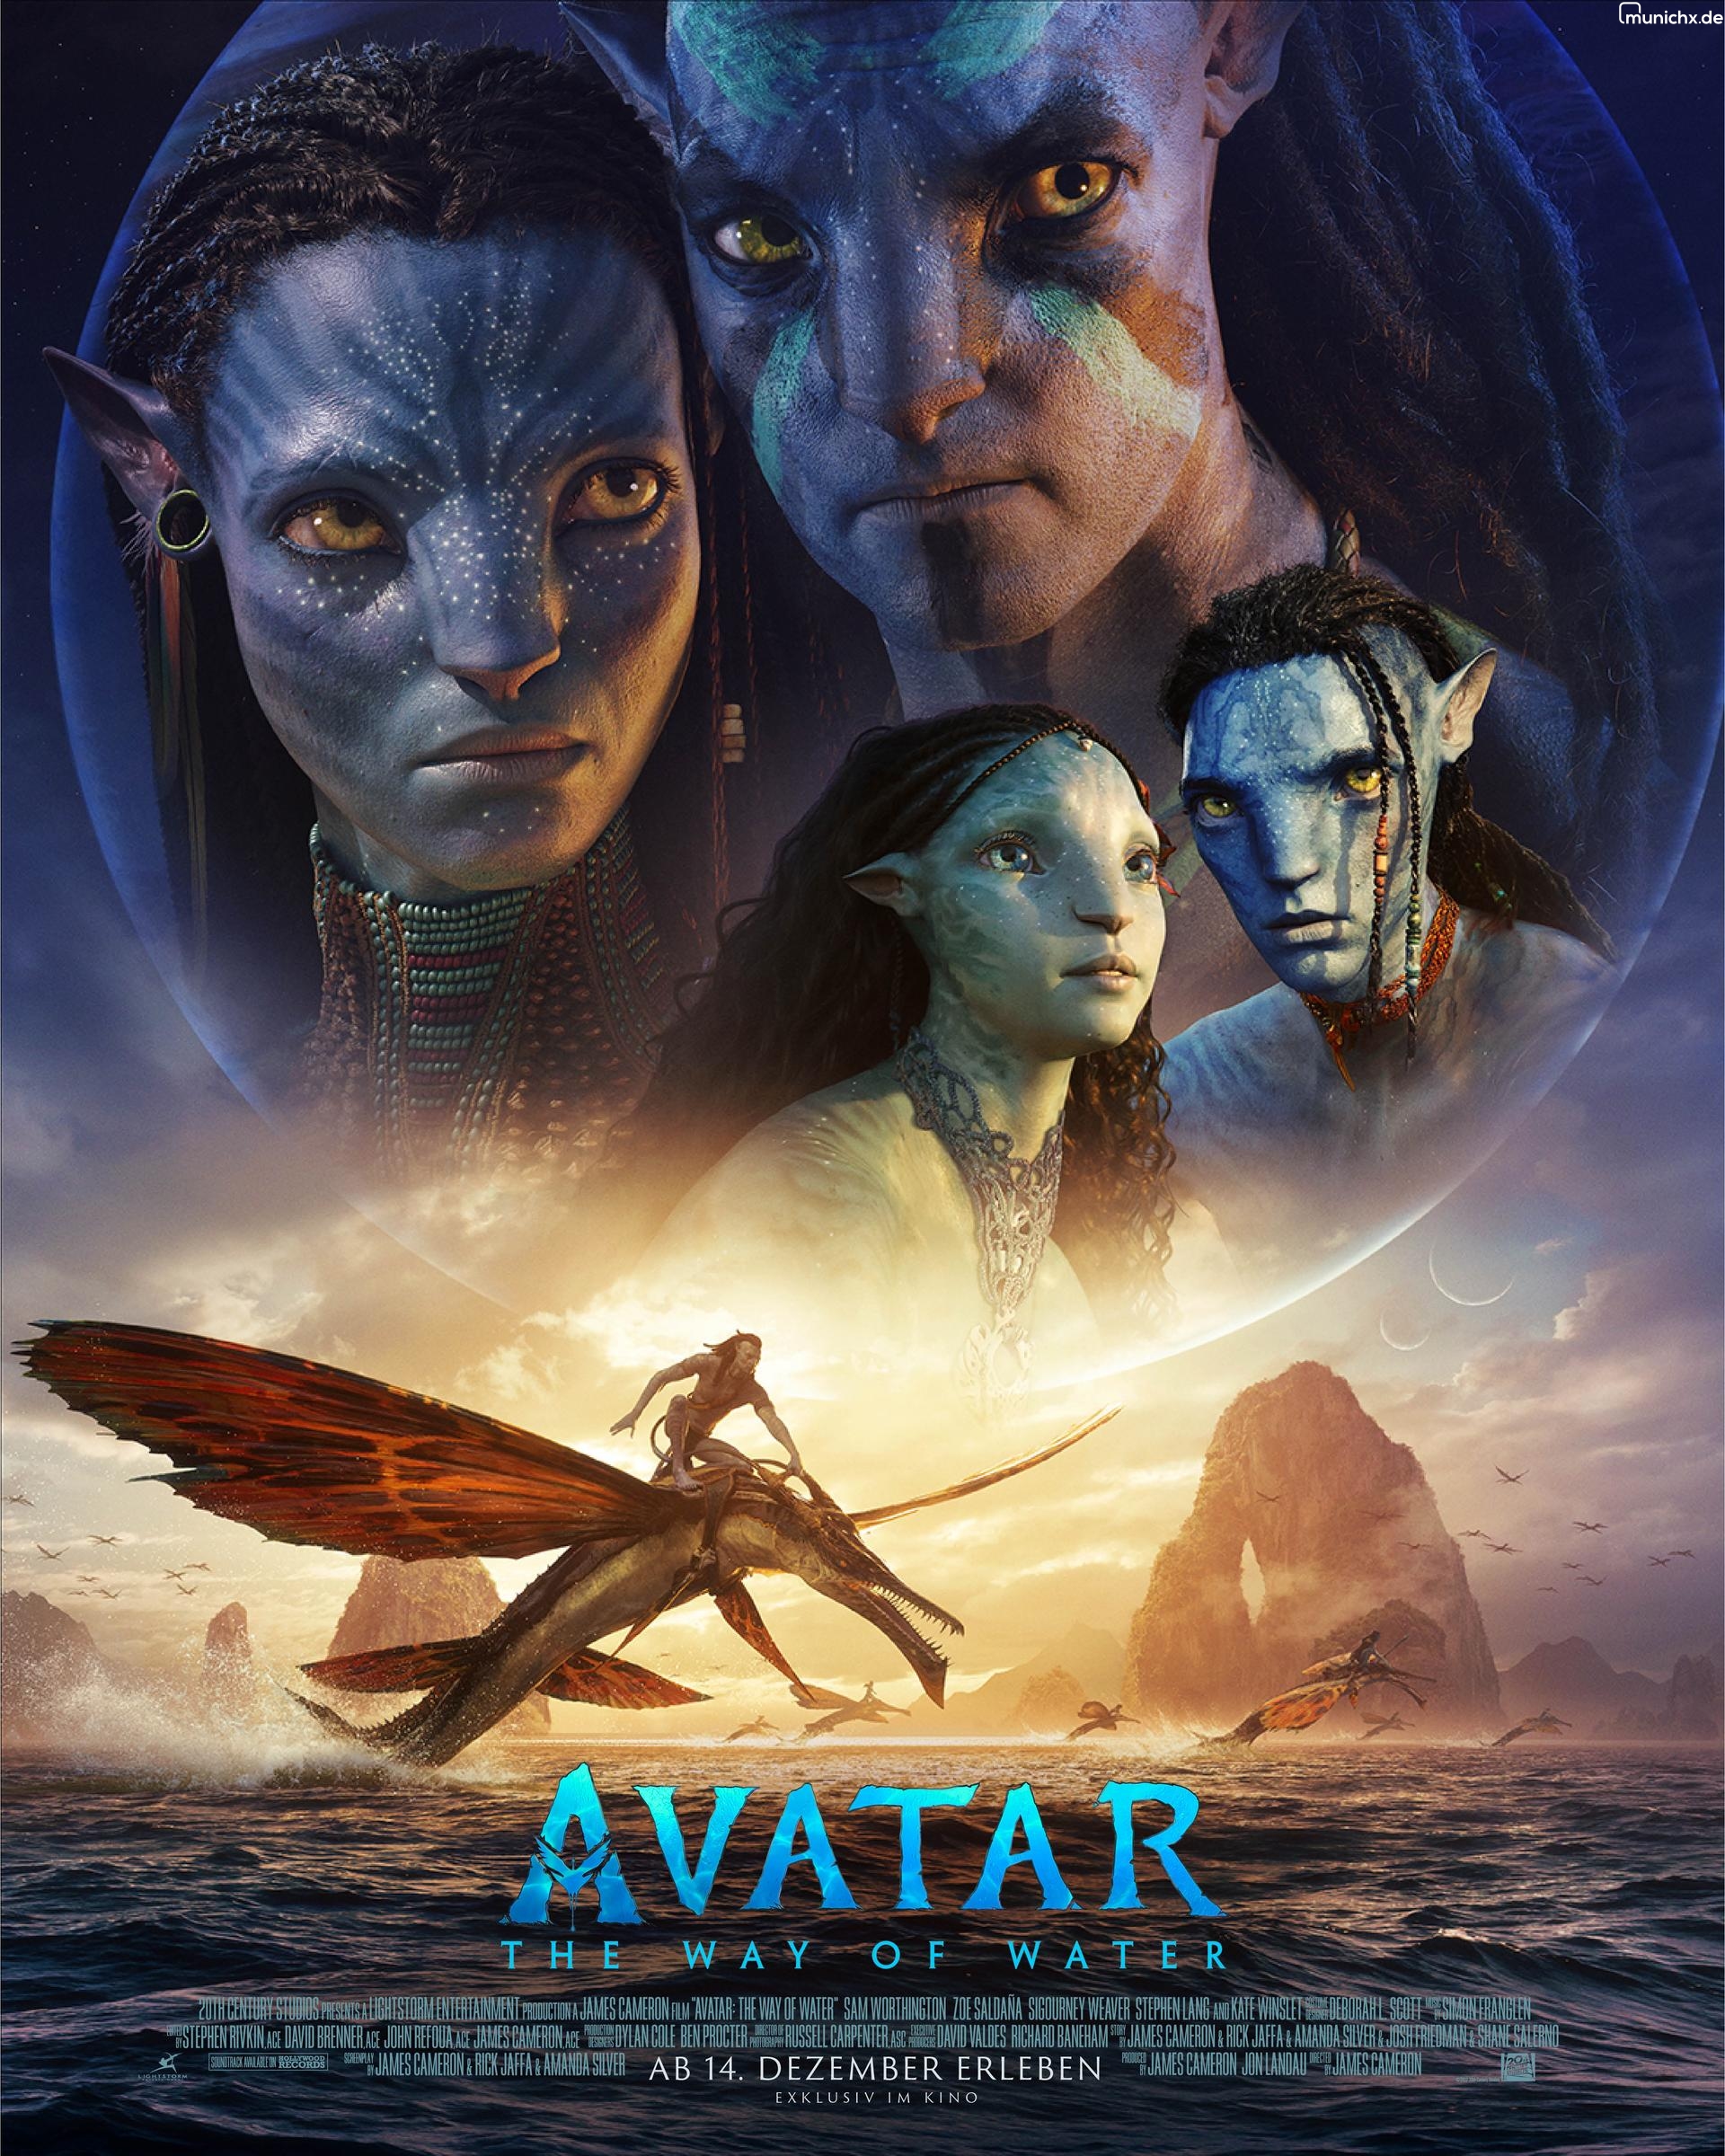 Avatar 2: The Way of Water HFR